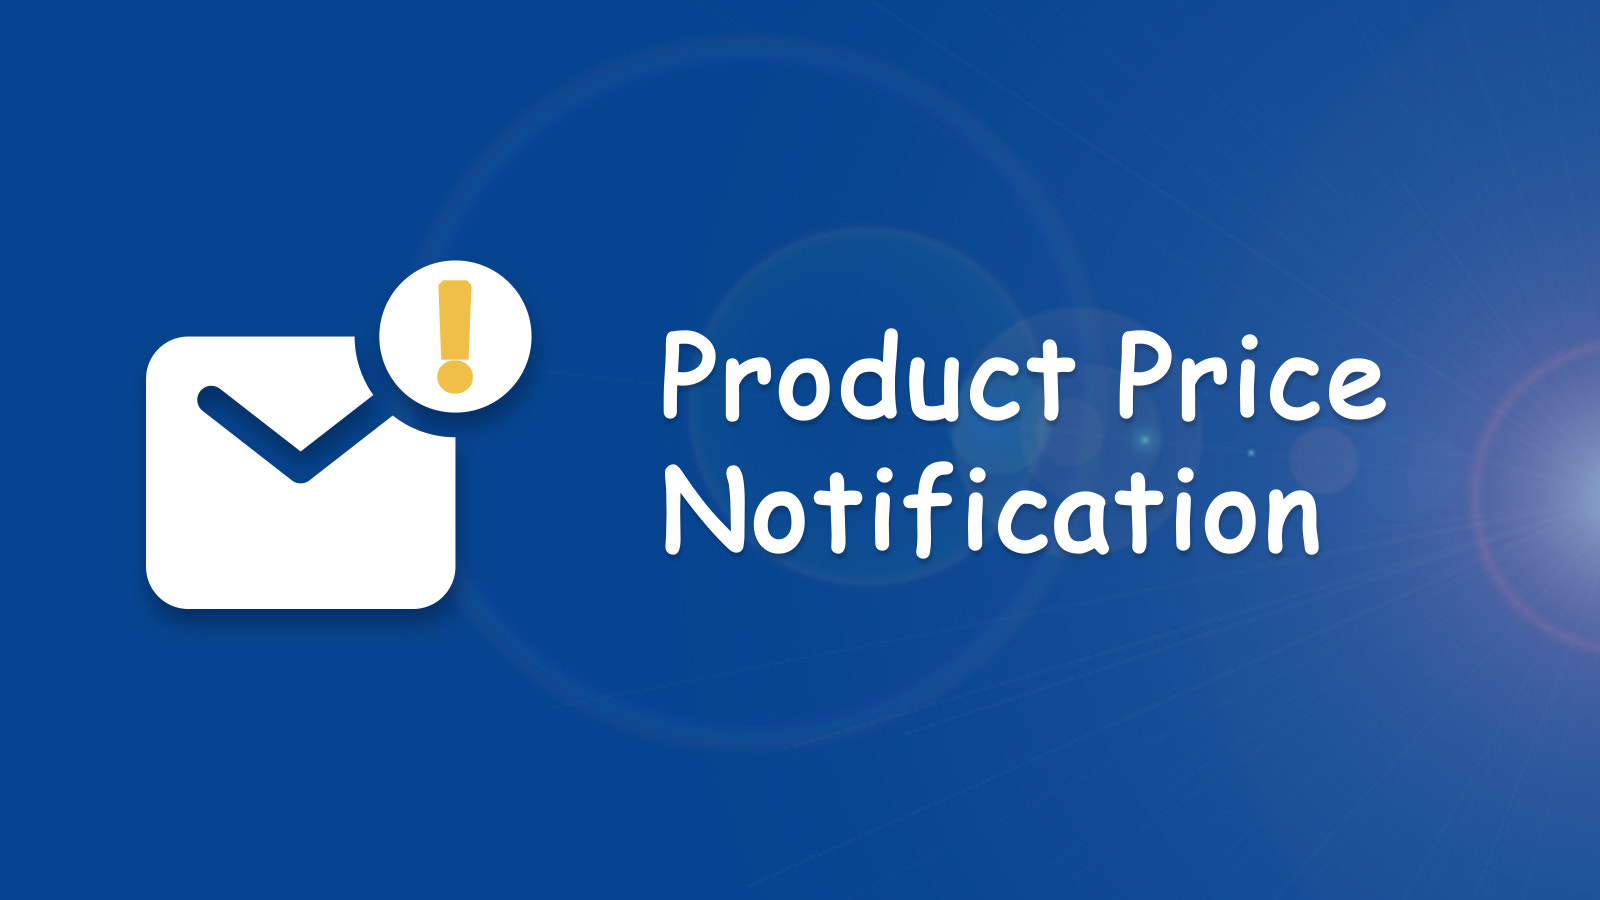 Product price notifications